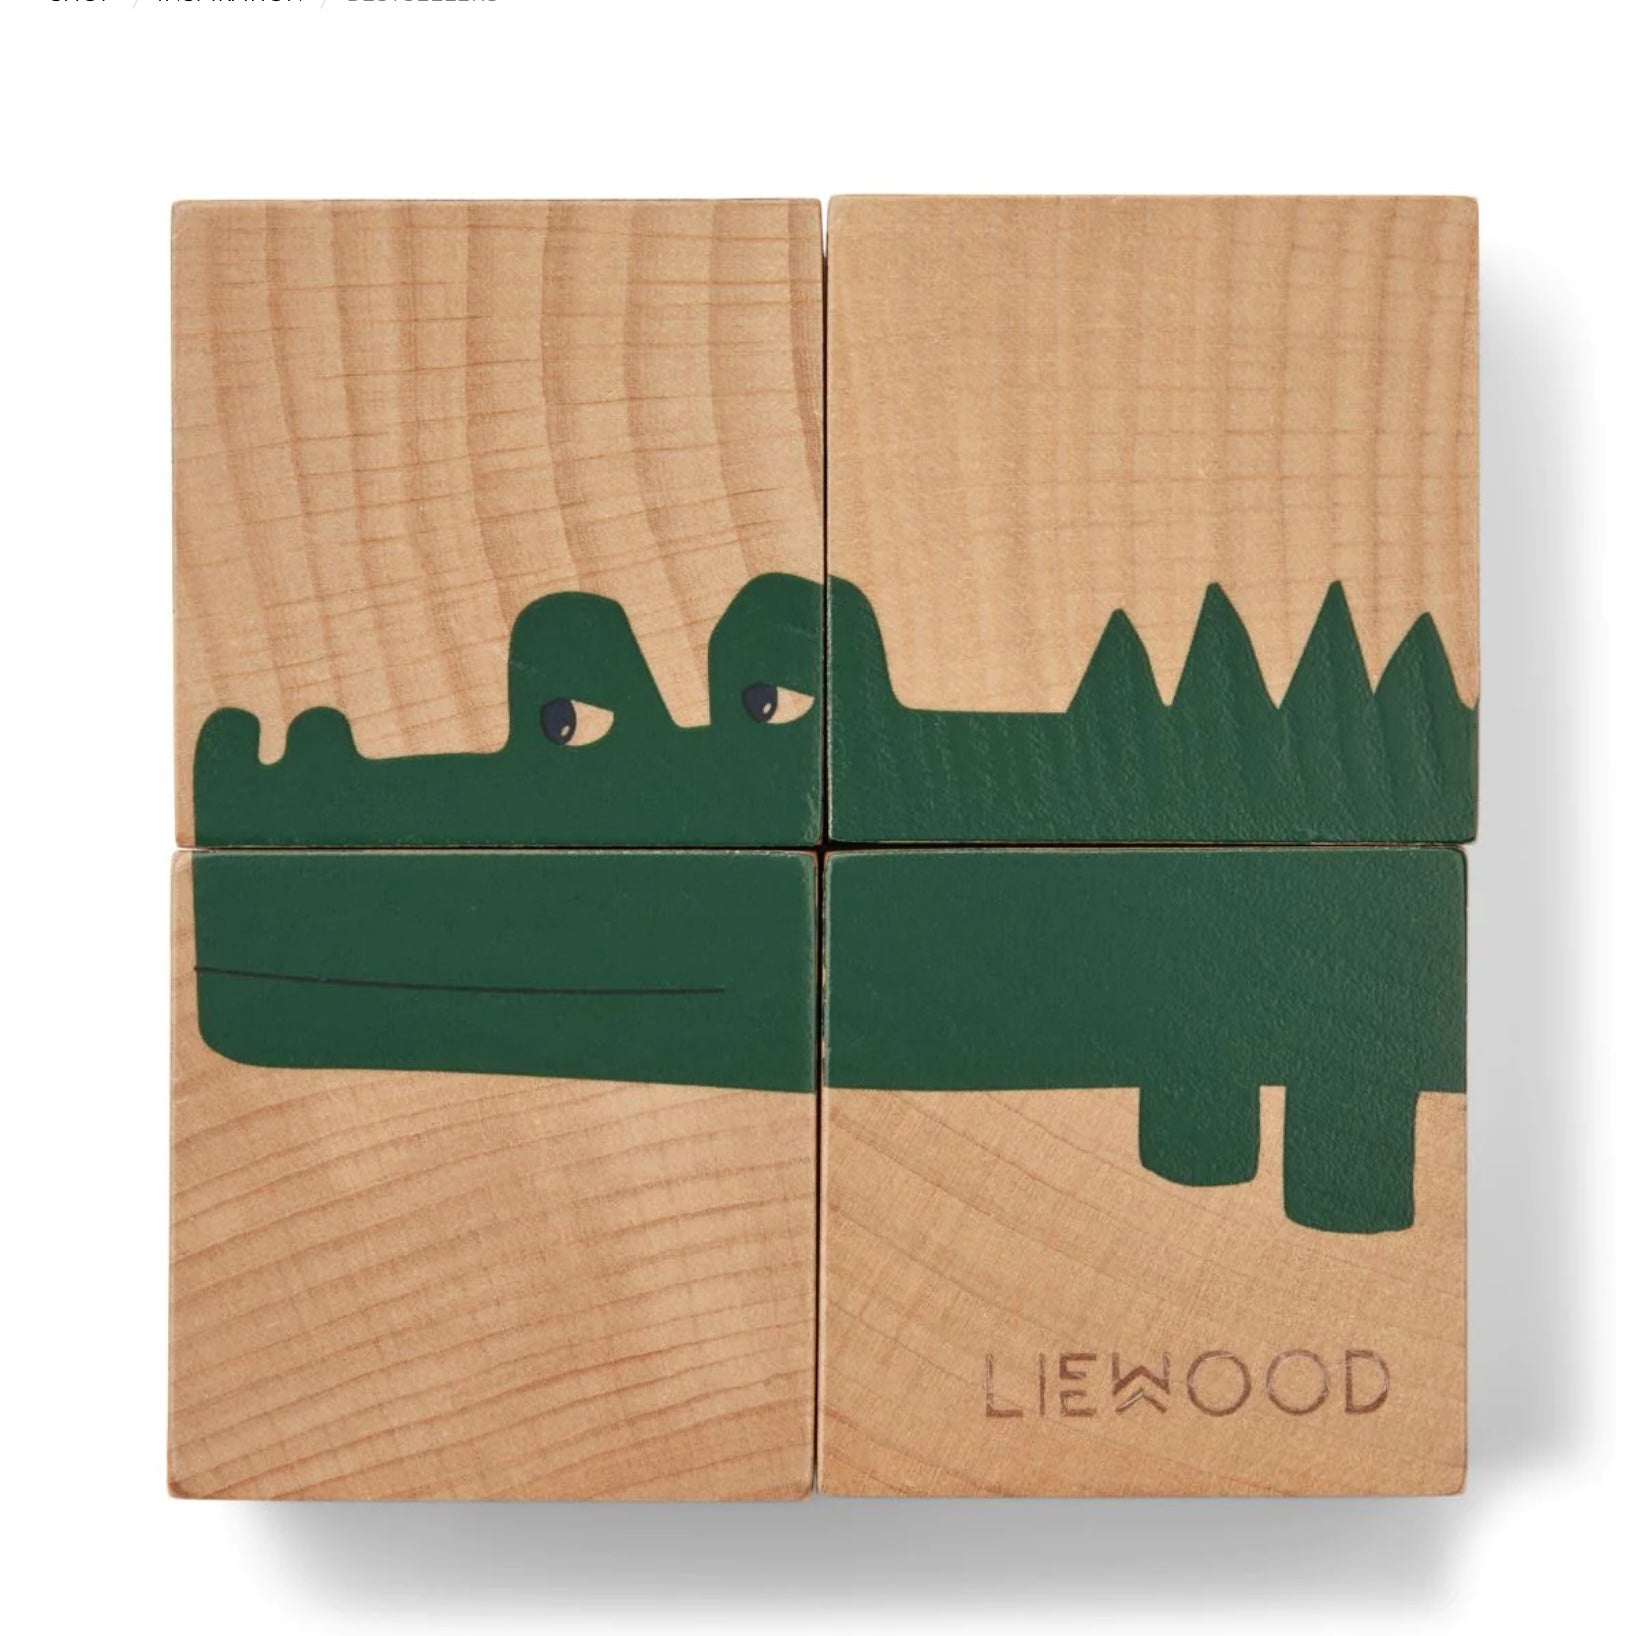 Liewood Puzzle Blocks - Aage puzzle